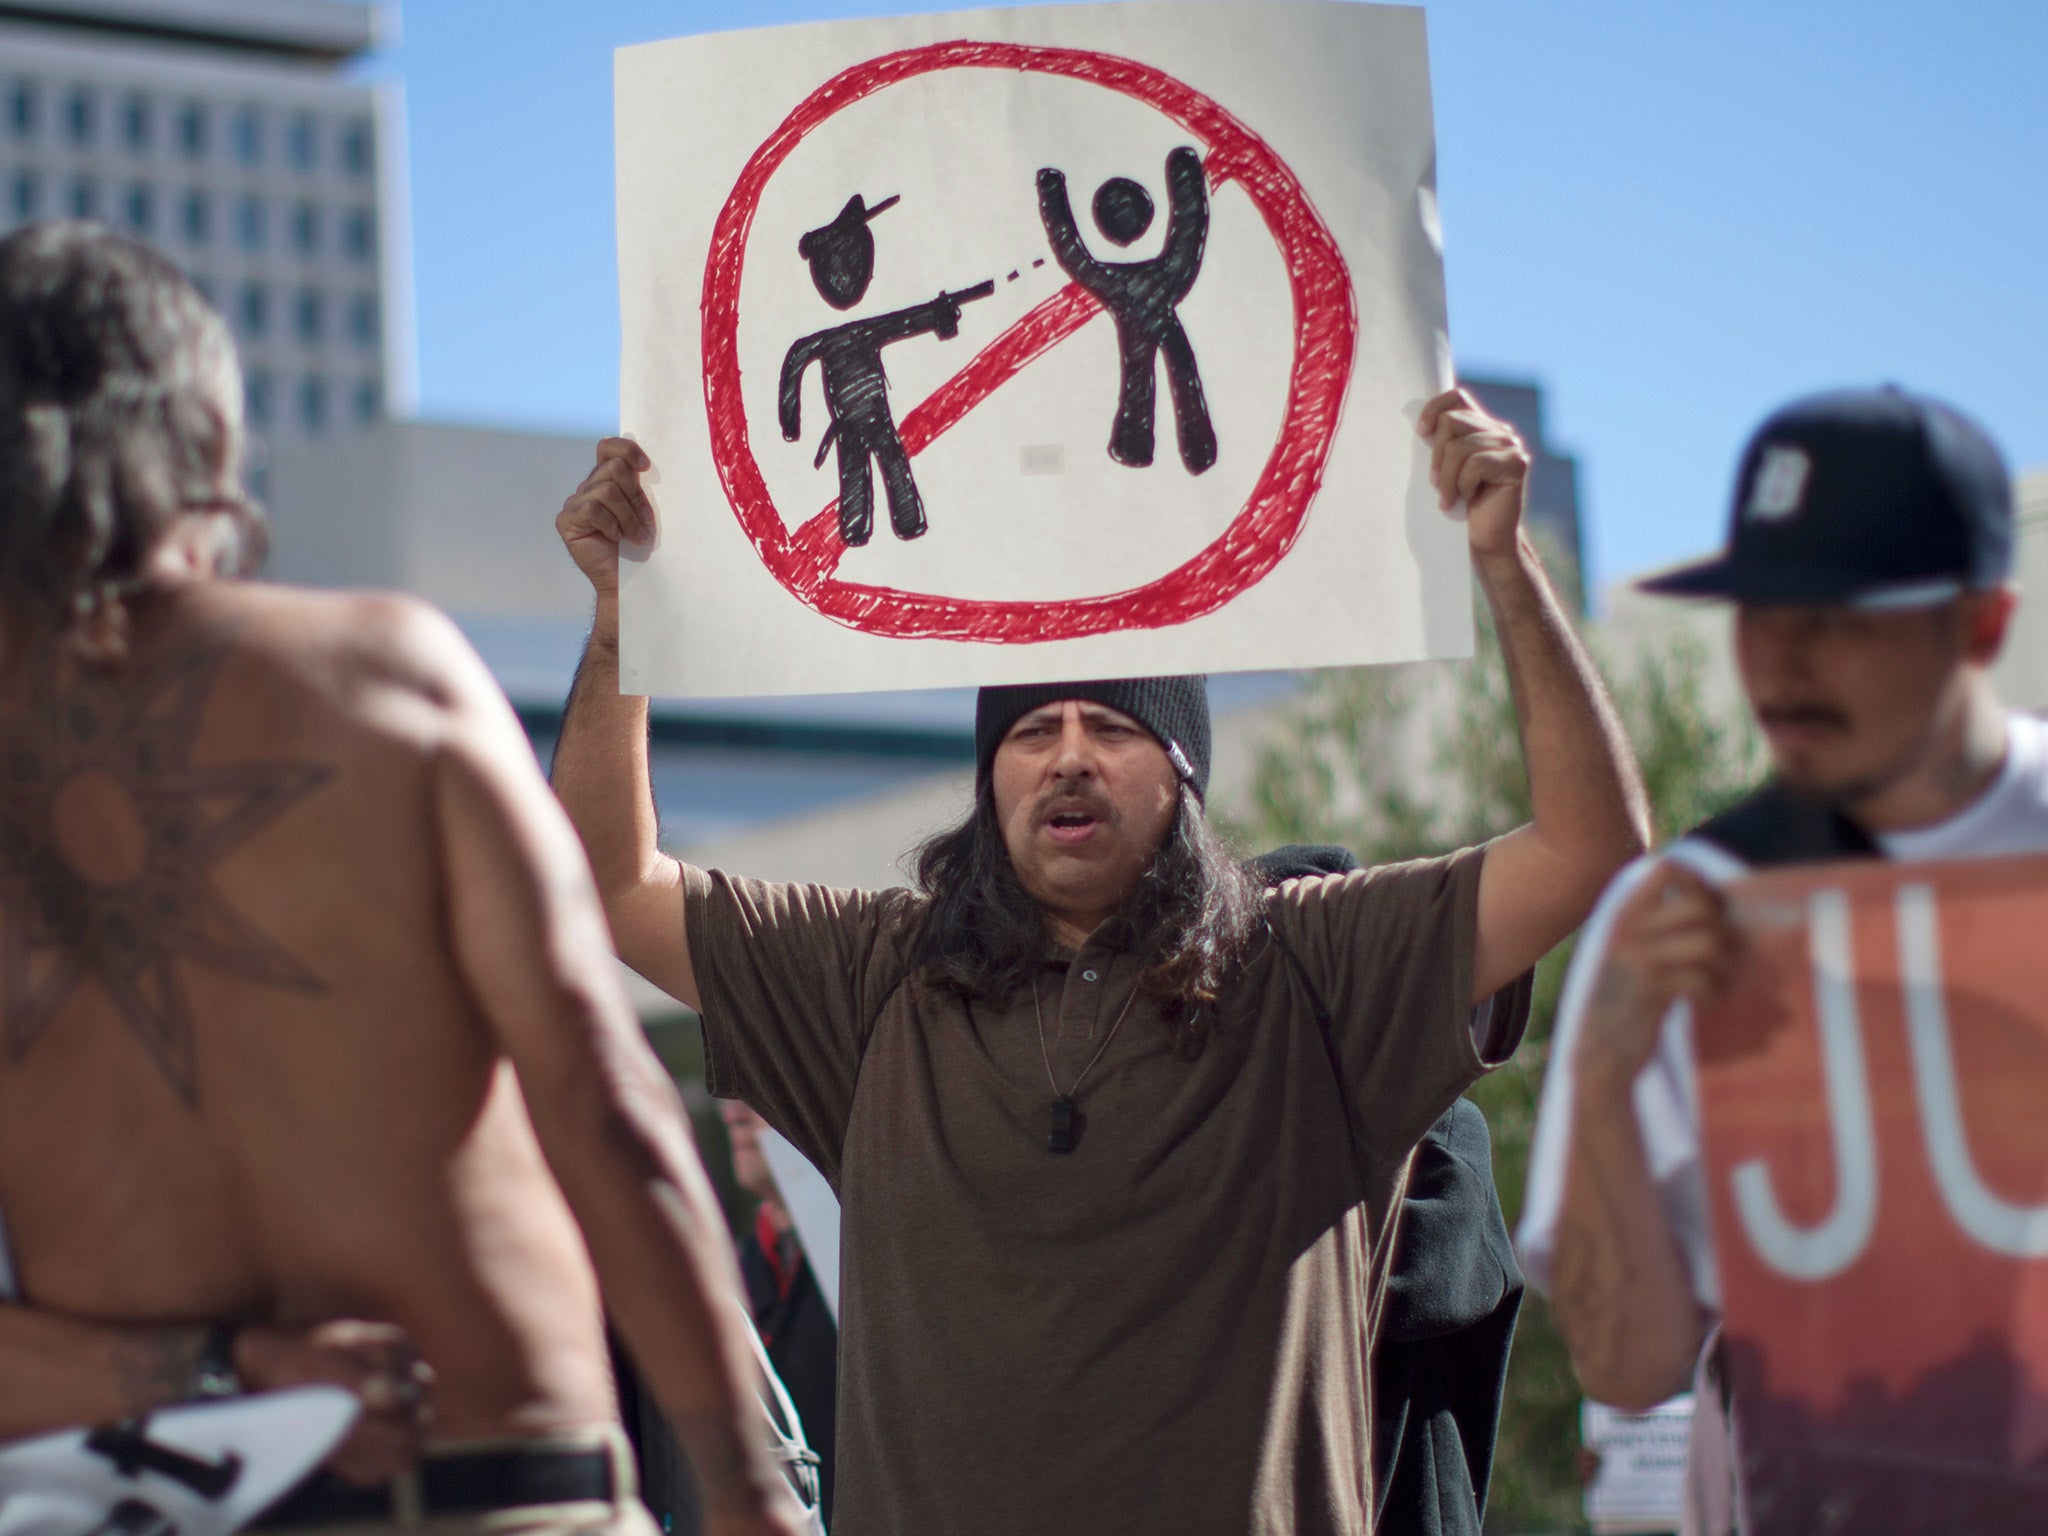 Protesters express their anger over the fatal police shooting of an unarmed homeless man, in Los Angeles earlier this year